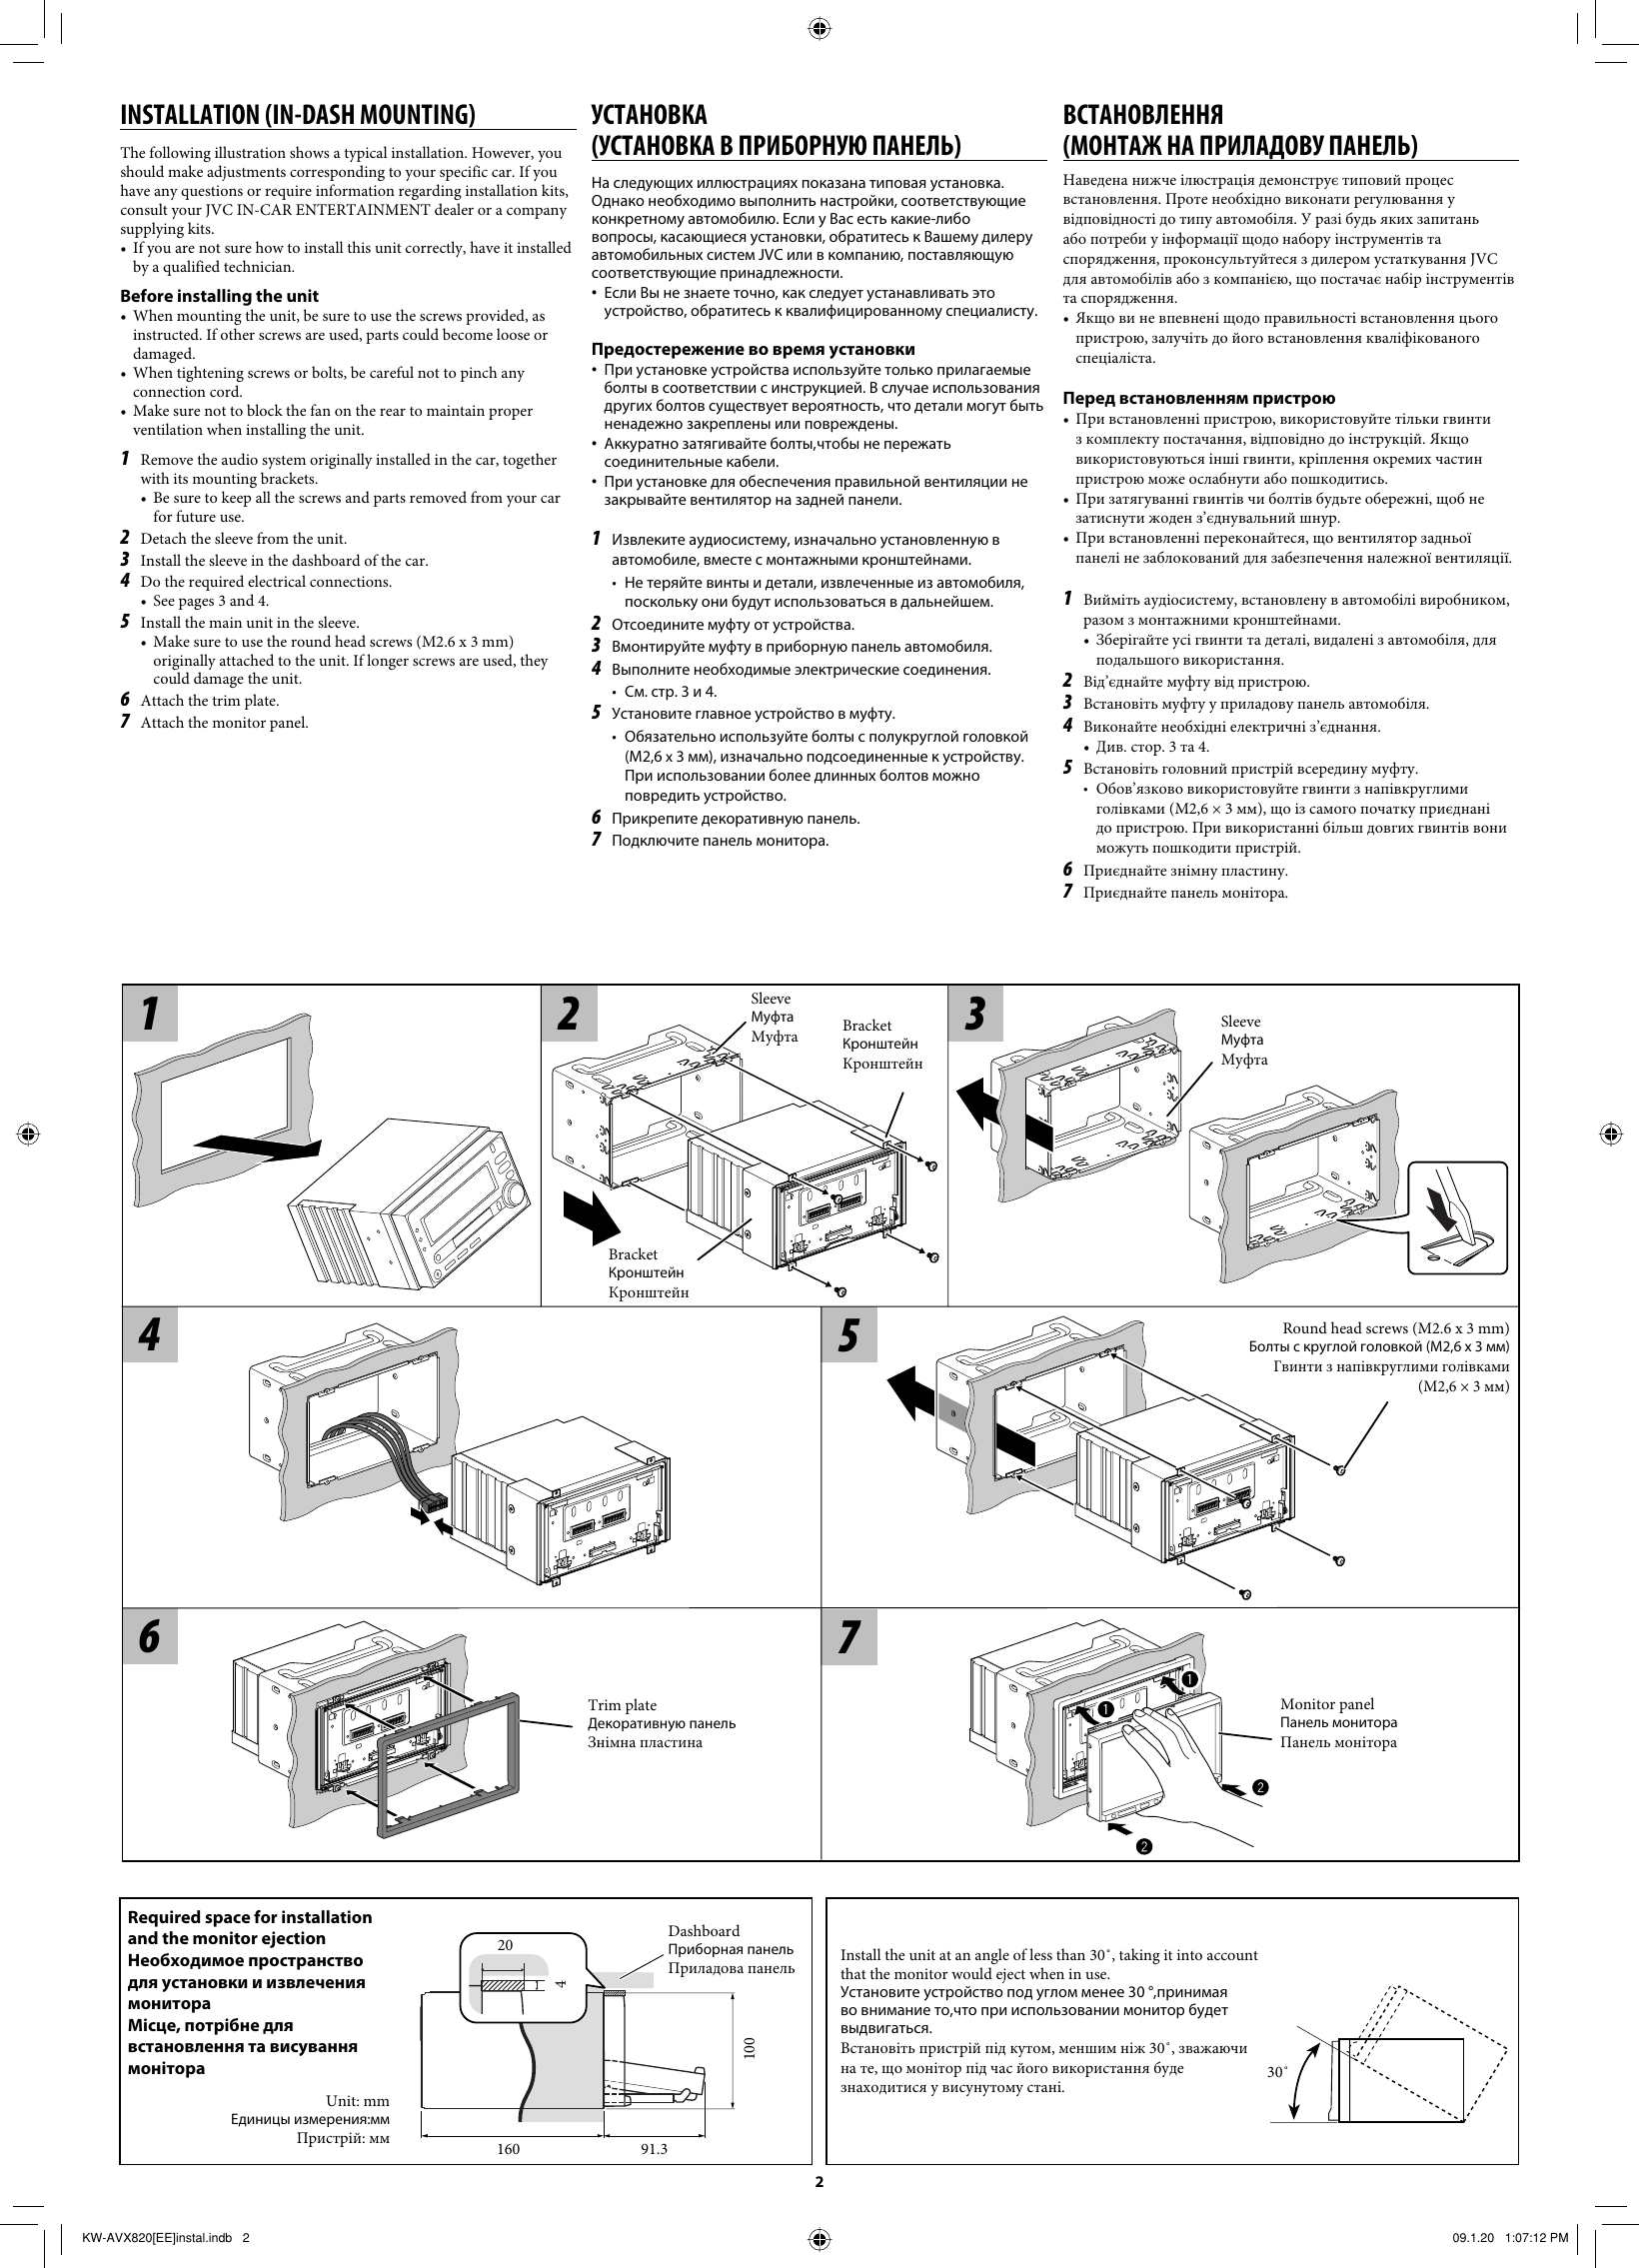 Page 2 of 6 - JVC KW-AVX820EE KW-AVX820[EE] Install User Manual LVT1958-008A